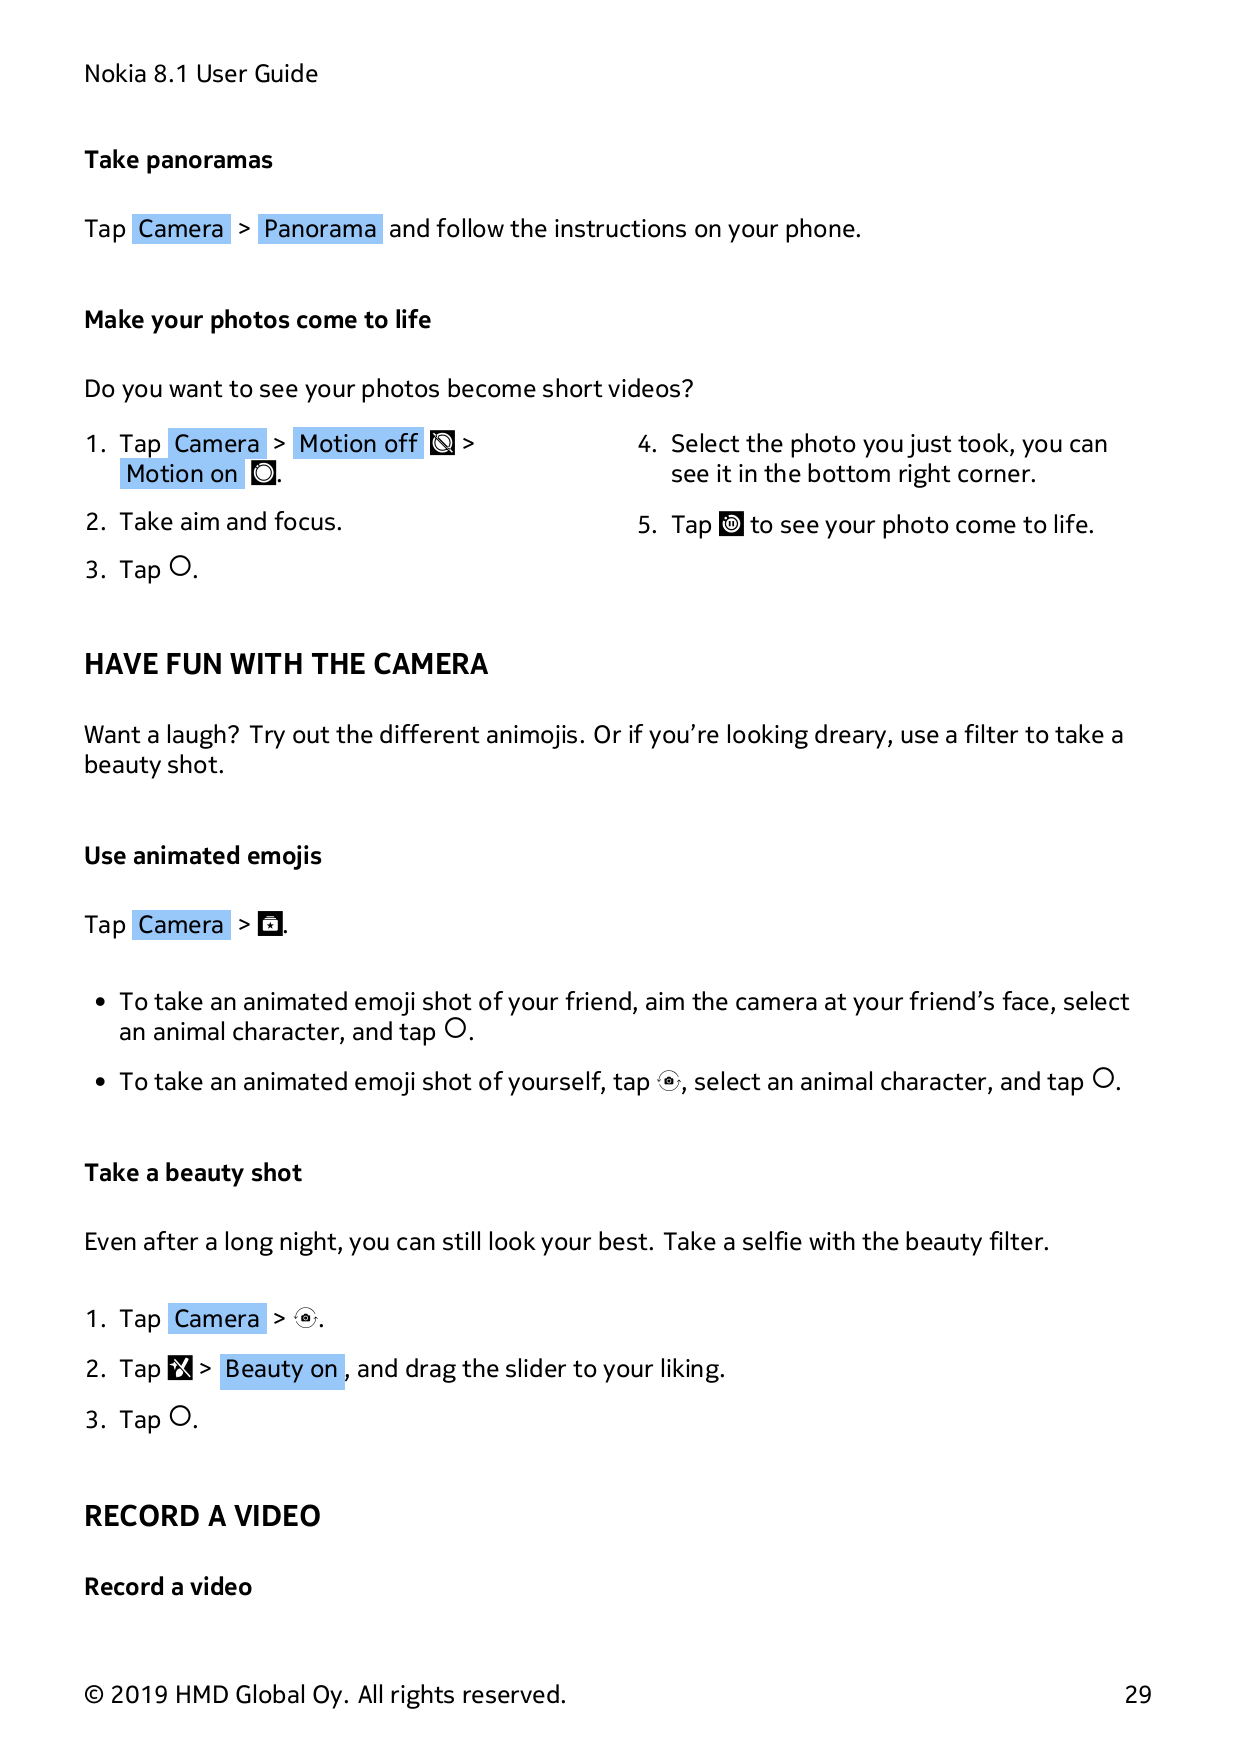 Nokia 8.1 User GuideTake panoramasTap Camera > Panorama and follow the instructions on your phone.Make your photos come to lifeD